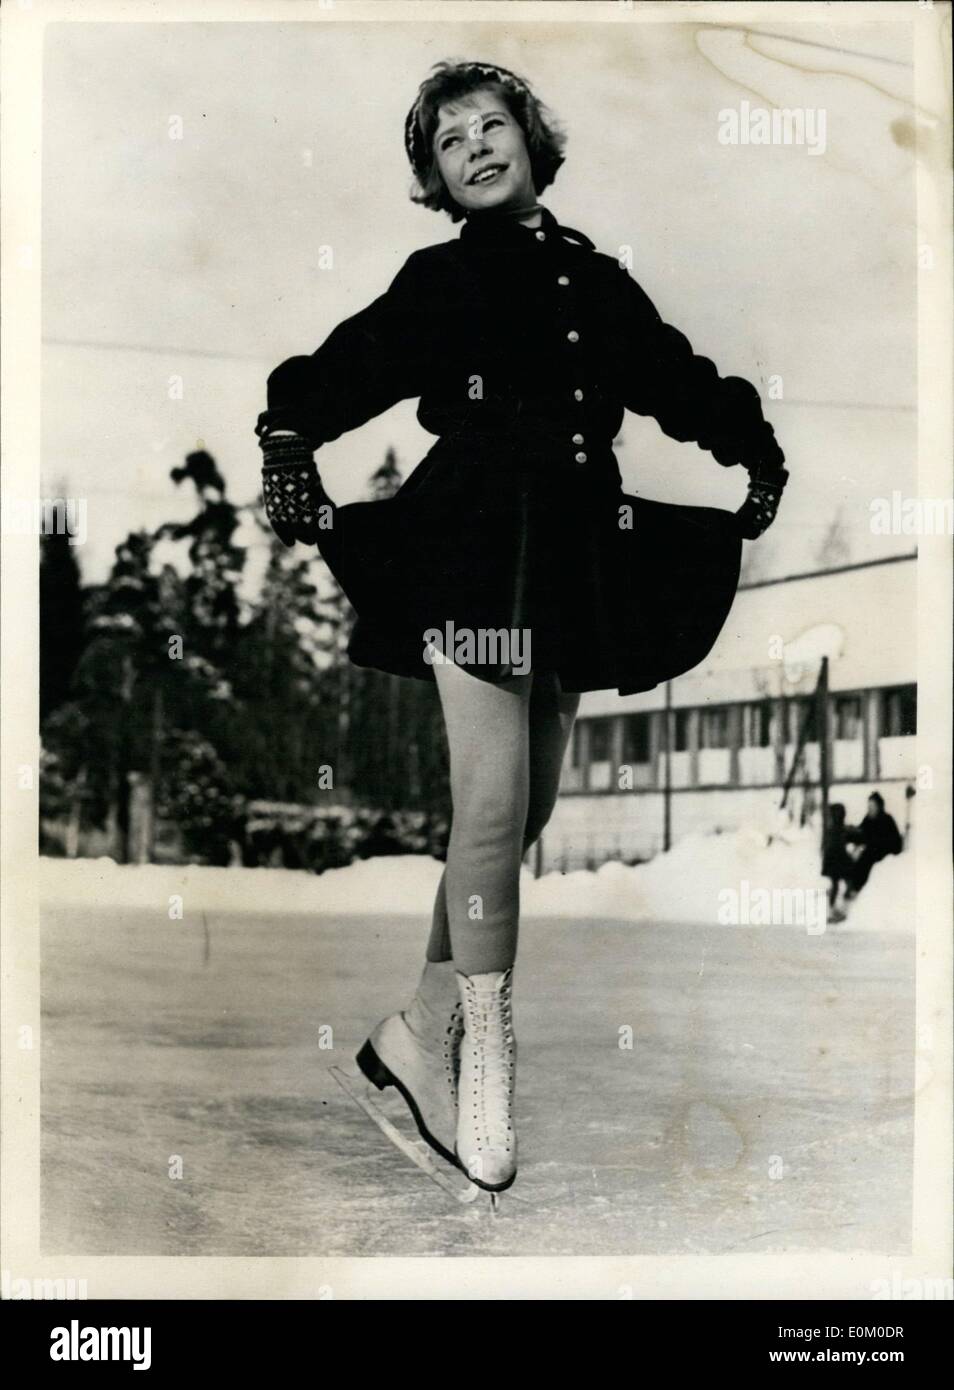 Feb. 02, 1953 - She is a real (N) Ice Princess. Stockholm's Royal skater in training.: Nine year old Princess Christina youngest daughter of Princess Sibylla of the Swedish Royal Family is learning to figure skate and her tutor Mrs. Karin Andren says that she has the makings of a star performer. Figure skating has not been any too popular in Sweden for some years but it is thought that Princess Christina's efforts will stimulate interest and that she will be a real nice ice Princess. Stock Photo